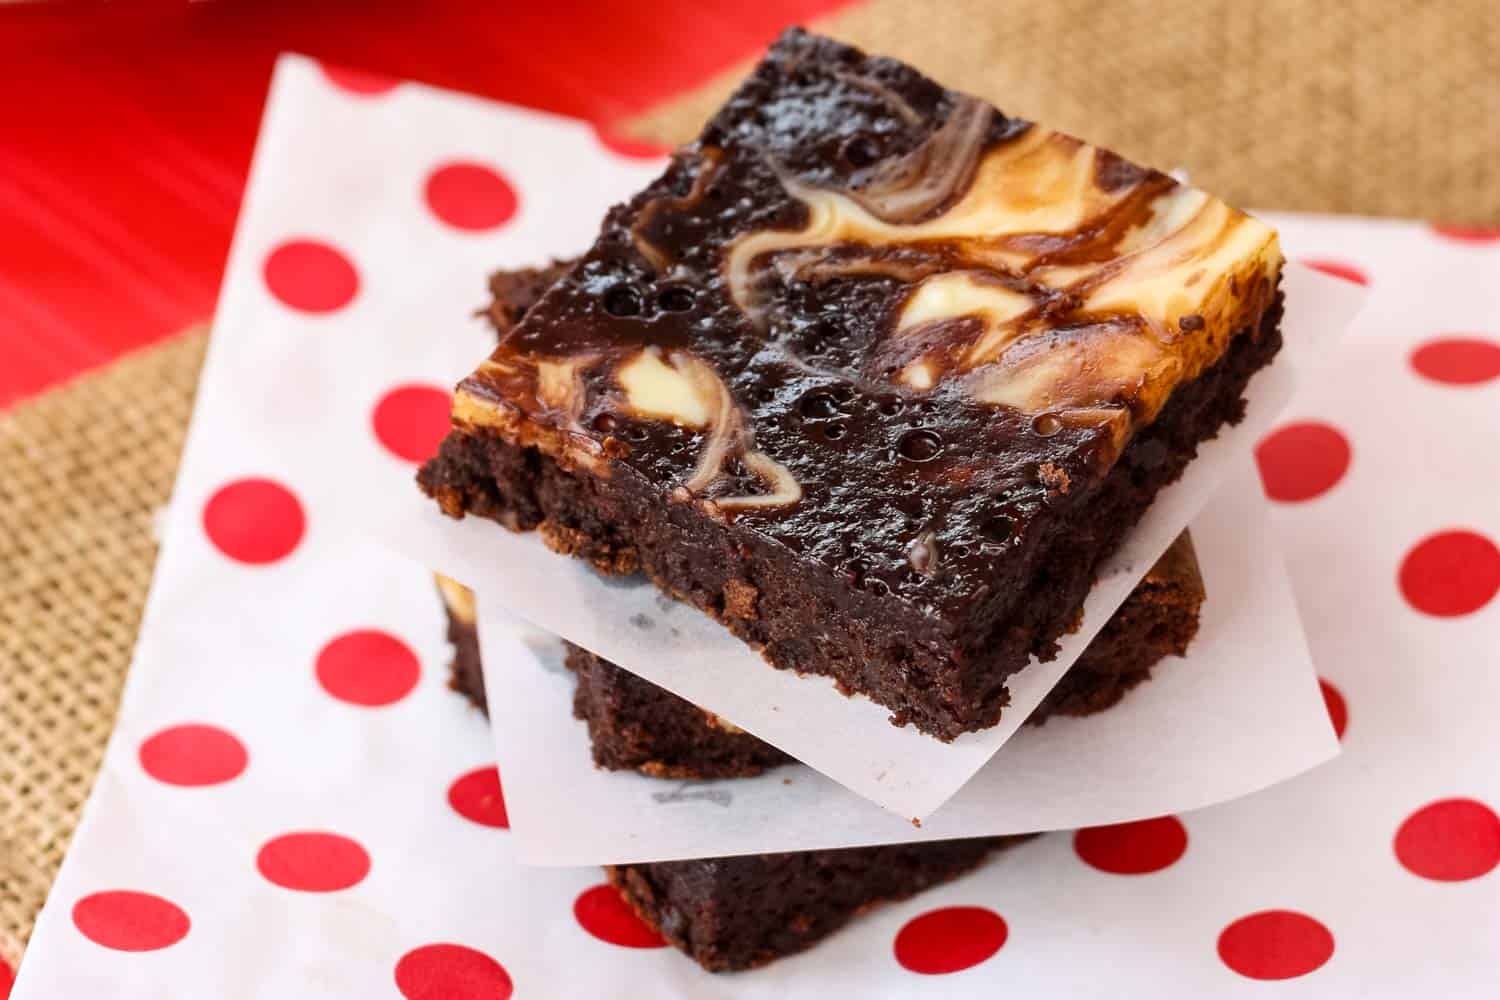 Three gluten free brownies with swirls of cheesecake and nutella stacked on a napkin with red polka dots.